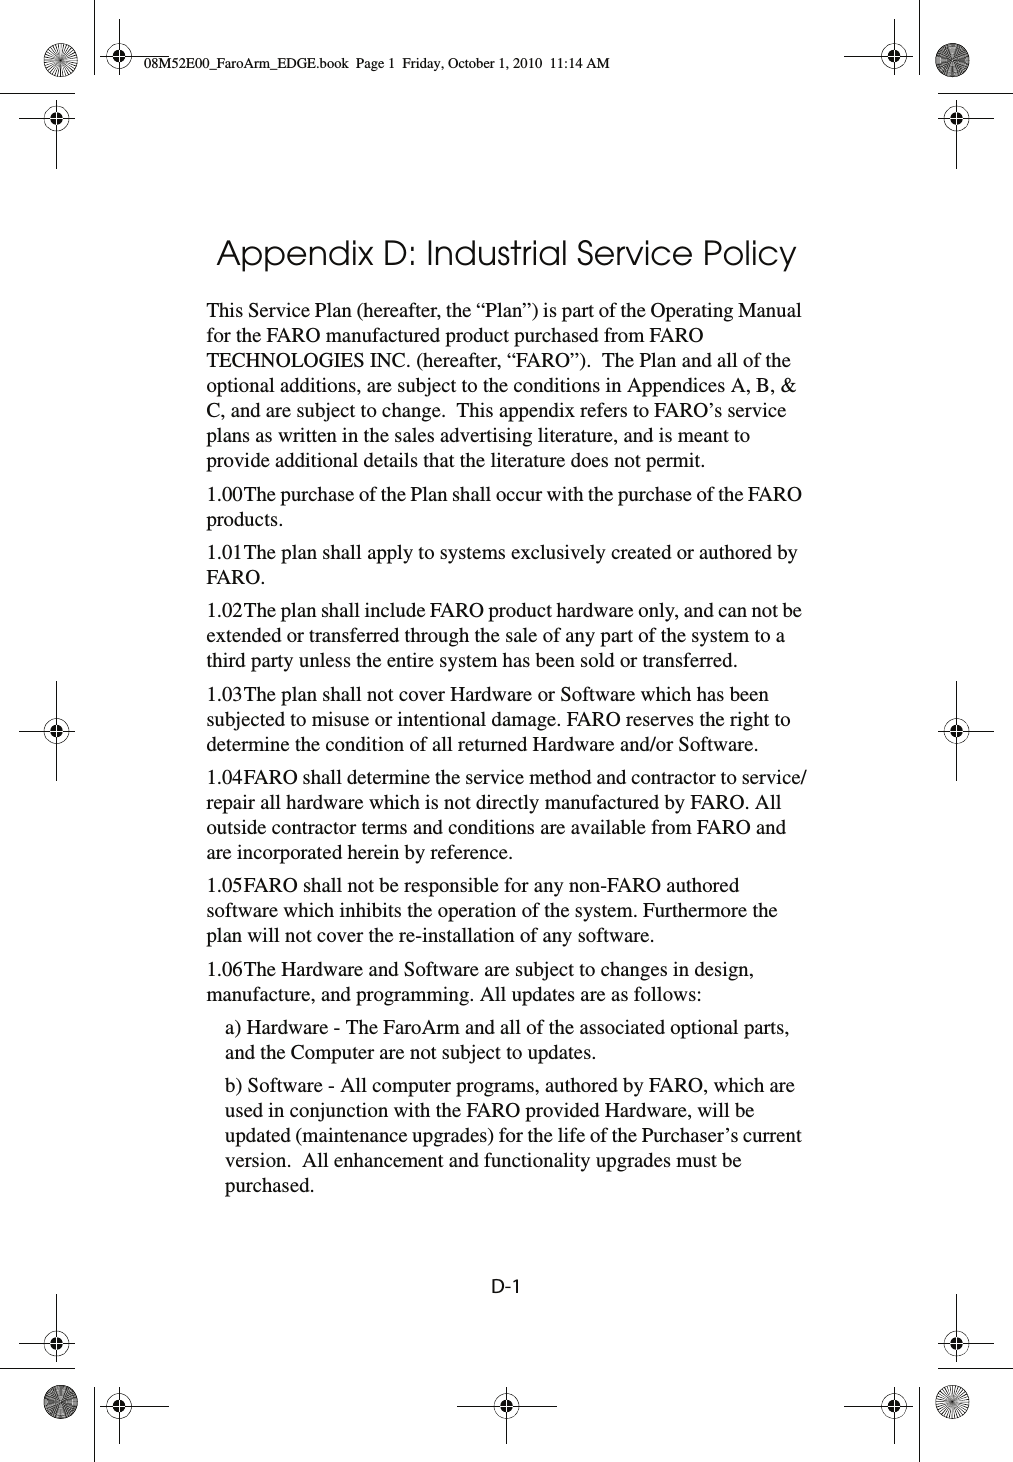 D-1Appendix D: Industrial Service Policy This Service Plan (hereafter, the “Plan”) is part of the Operating Manual for the FARO manufactured product purchased from FARO TECHNOLOGIES INC. (hereafter, “FARO”).  The Plan and all of the optional additions, are subject to the conditions in Appendices A, B, &amp; C, and are subject to change.  This appendix refers to FARO’s service plans as written in the sales advertising literature, and is meant to provide additional details that the literature does not permit. 1.00The purchase of the Plan shall occur with the purchase of the FARO products. 1.01The plan shall apply to systems exclusively created or authored by FARO.1.02The plan shall include FARO product hardware only, and can not be extended or transferred through the sale of any part of the system to a third party unless the entire system has been sold or transferred.1.03The plan shall not cover Hardware or Software which has been subjected to misuse or intentional damage. FARO reserves the right to determine the condition of all returned Hardware and/or Software.1.04FARO shall determine the service method and contractor to service/repair all hardware which is not directly manufactured by FARO. All outside contractor terms and conditions are available from FARO and are incorporated herein by reference.1.05FARO shall not be responsible for any non-FARO authored software which inhibits the operation of the system. Furthermore the plan will not cover the re-installation of any software.1.06The Hardware and Software are subject to changes in design, manufacture, and programming. All updates are as follows:a) Hardware - The FaroArm and all of the associated optional parts, and the Computer are not subject to updates.b) Software - All computer programs, authored by FARO, which are used in conjunction with the FARO provided Hardware, will be updated (maintenance upgrades) for the life of the Purchaser’s current version.  All enhancement and functionality upgrades must be purchased.08M52E00_FaroArm_EDGE.book  Page 1  Friday, October 1, 2010  11:14 AM